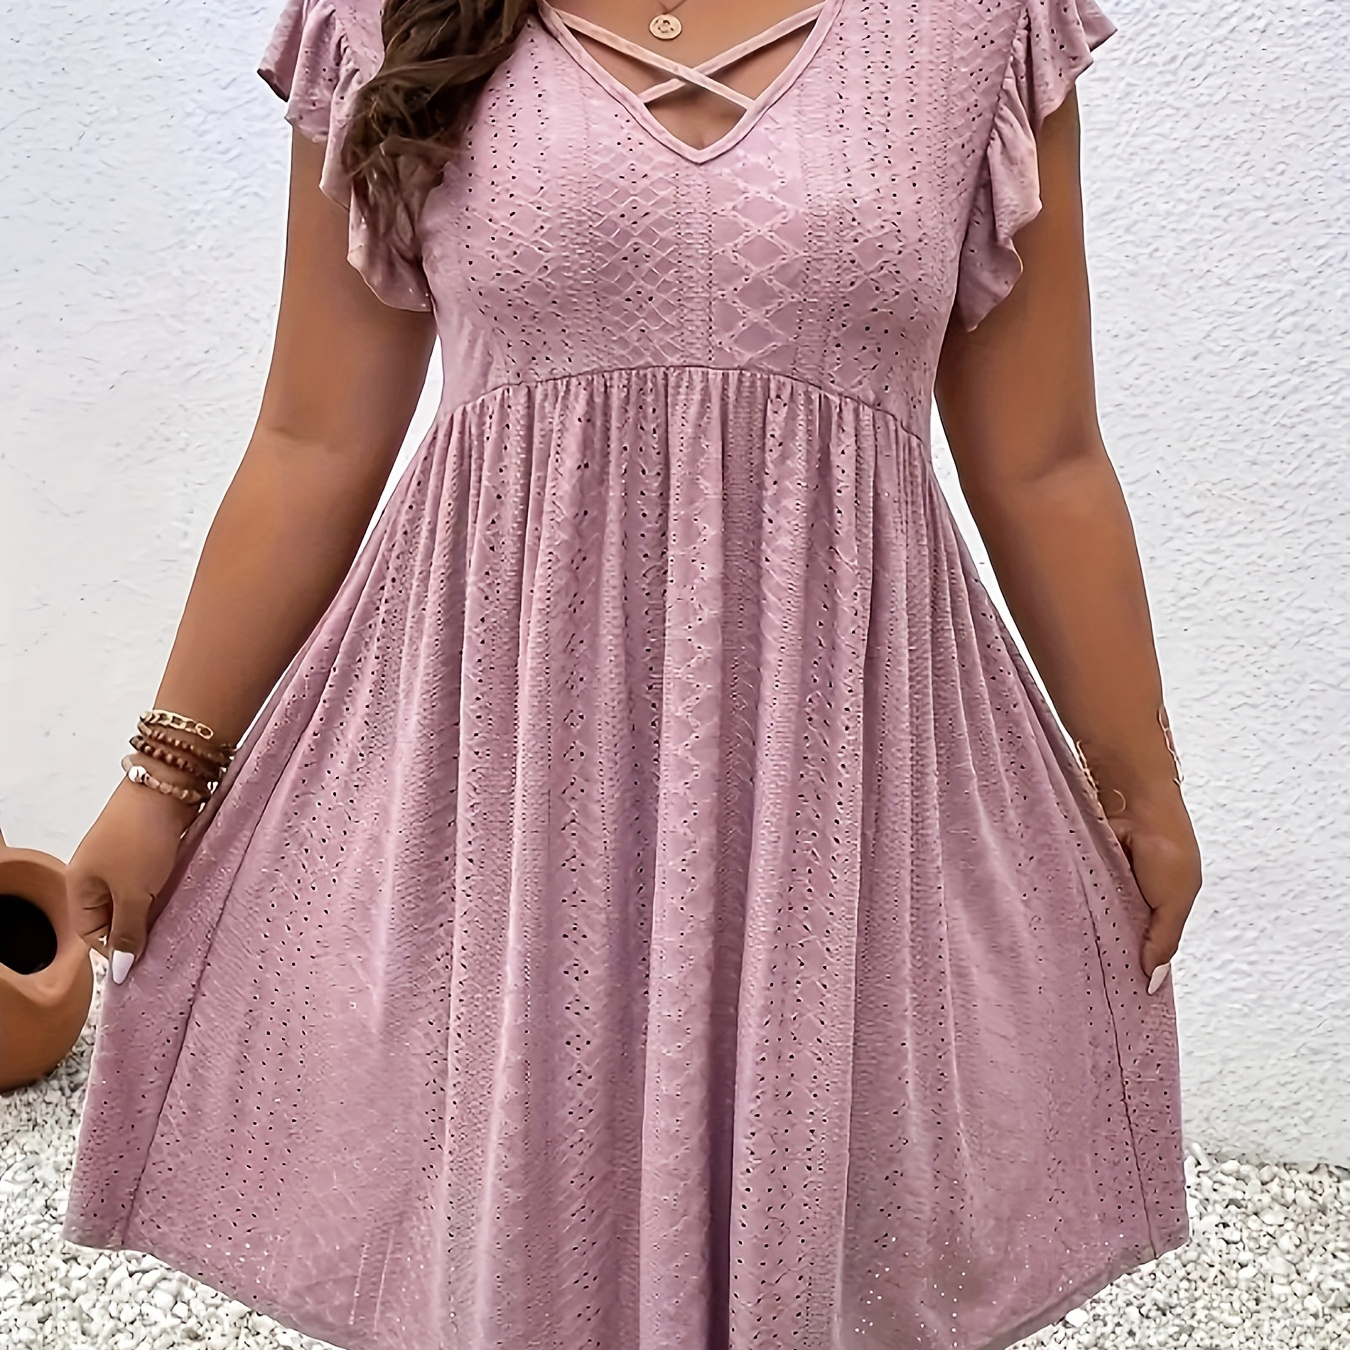 

Plus Size Solid Eyelet Cut Out Criss Dress, Casual Flutter Sleeve Above Knee Dress For Spring & Summer, Women's Plus Size Clothing